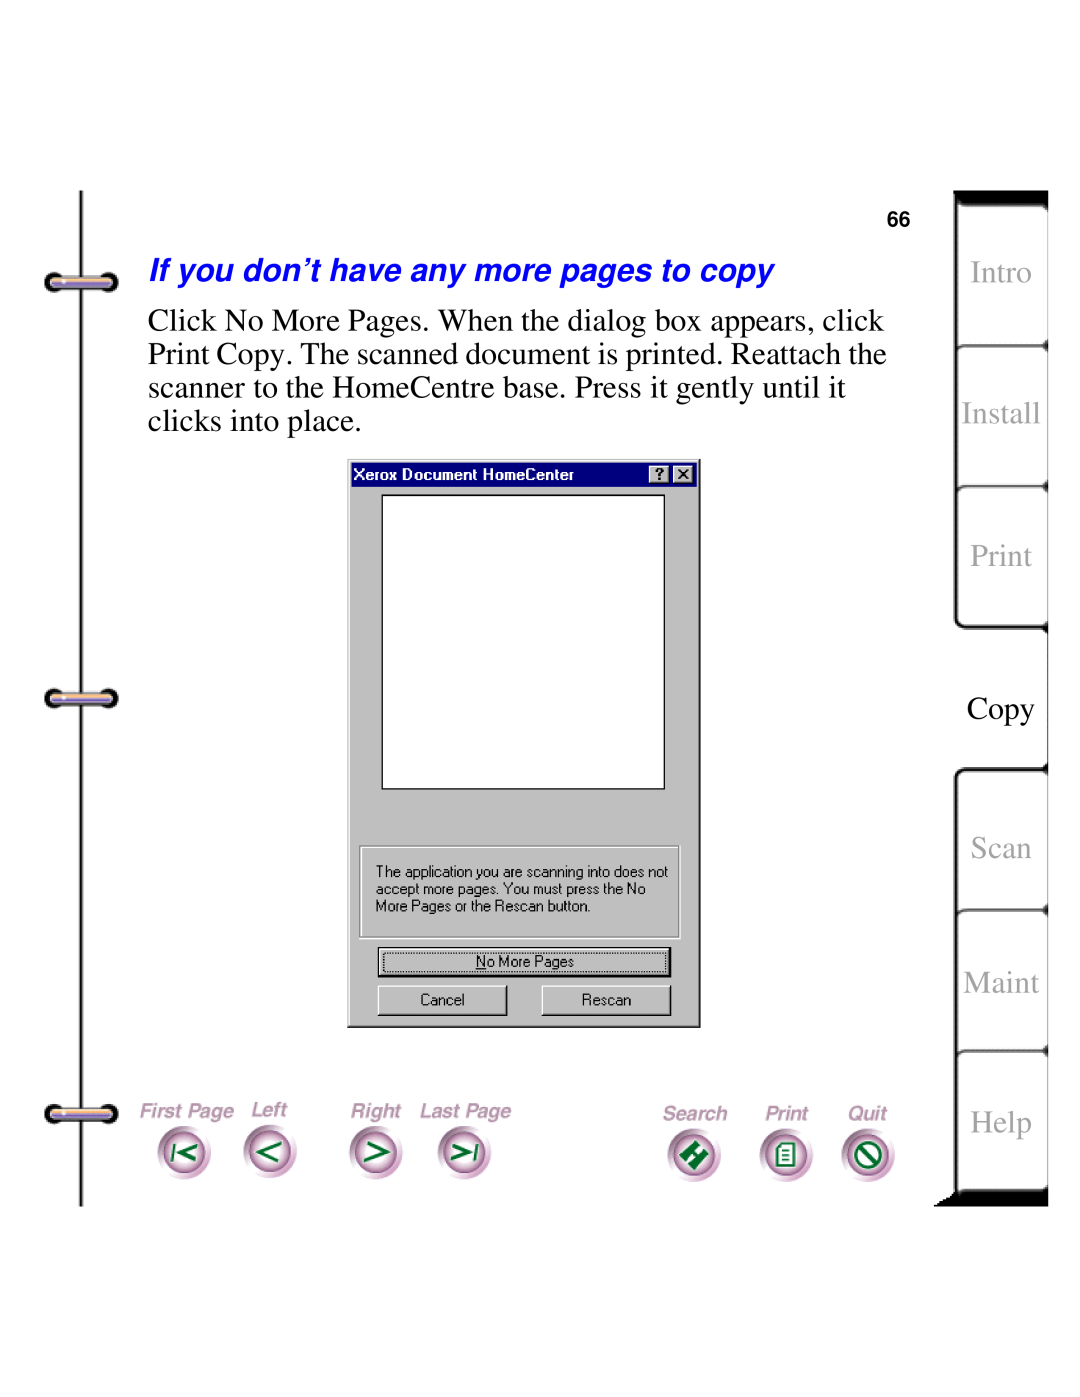 Xerox Document HomeCentre manual If you don’t have any more pages to copy, Intro Install Print, Copy, Scan Maint, Help 